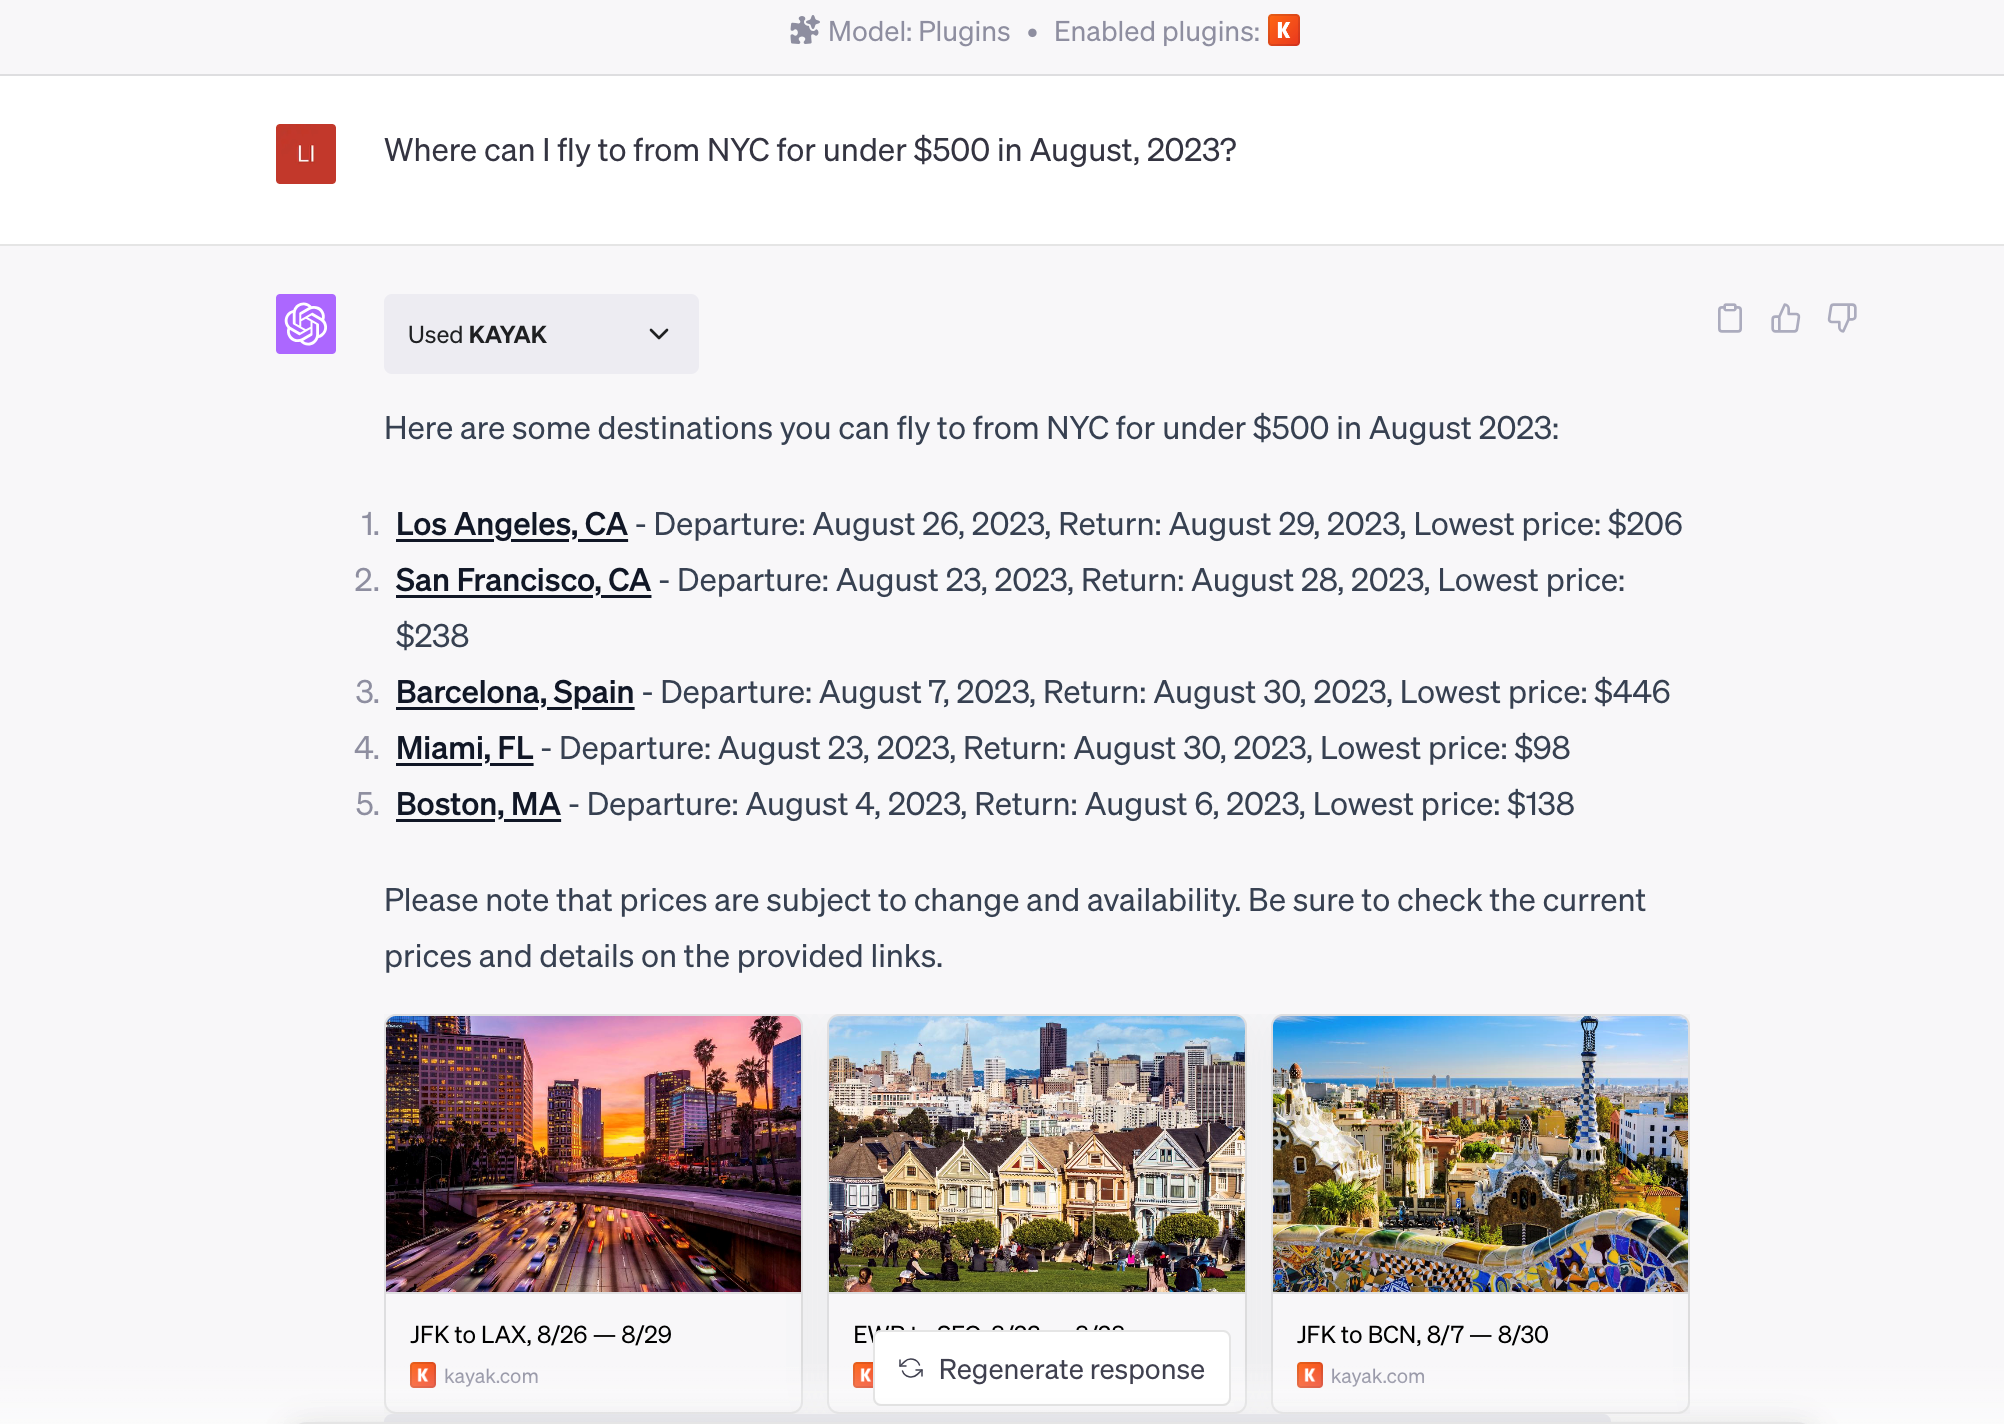 Chatgpt Plugins Kayak Suggestions On Flying to From NYC for Under $500 in August 2023